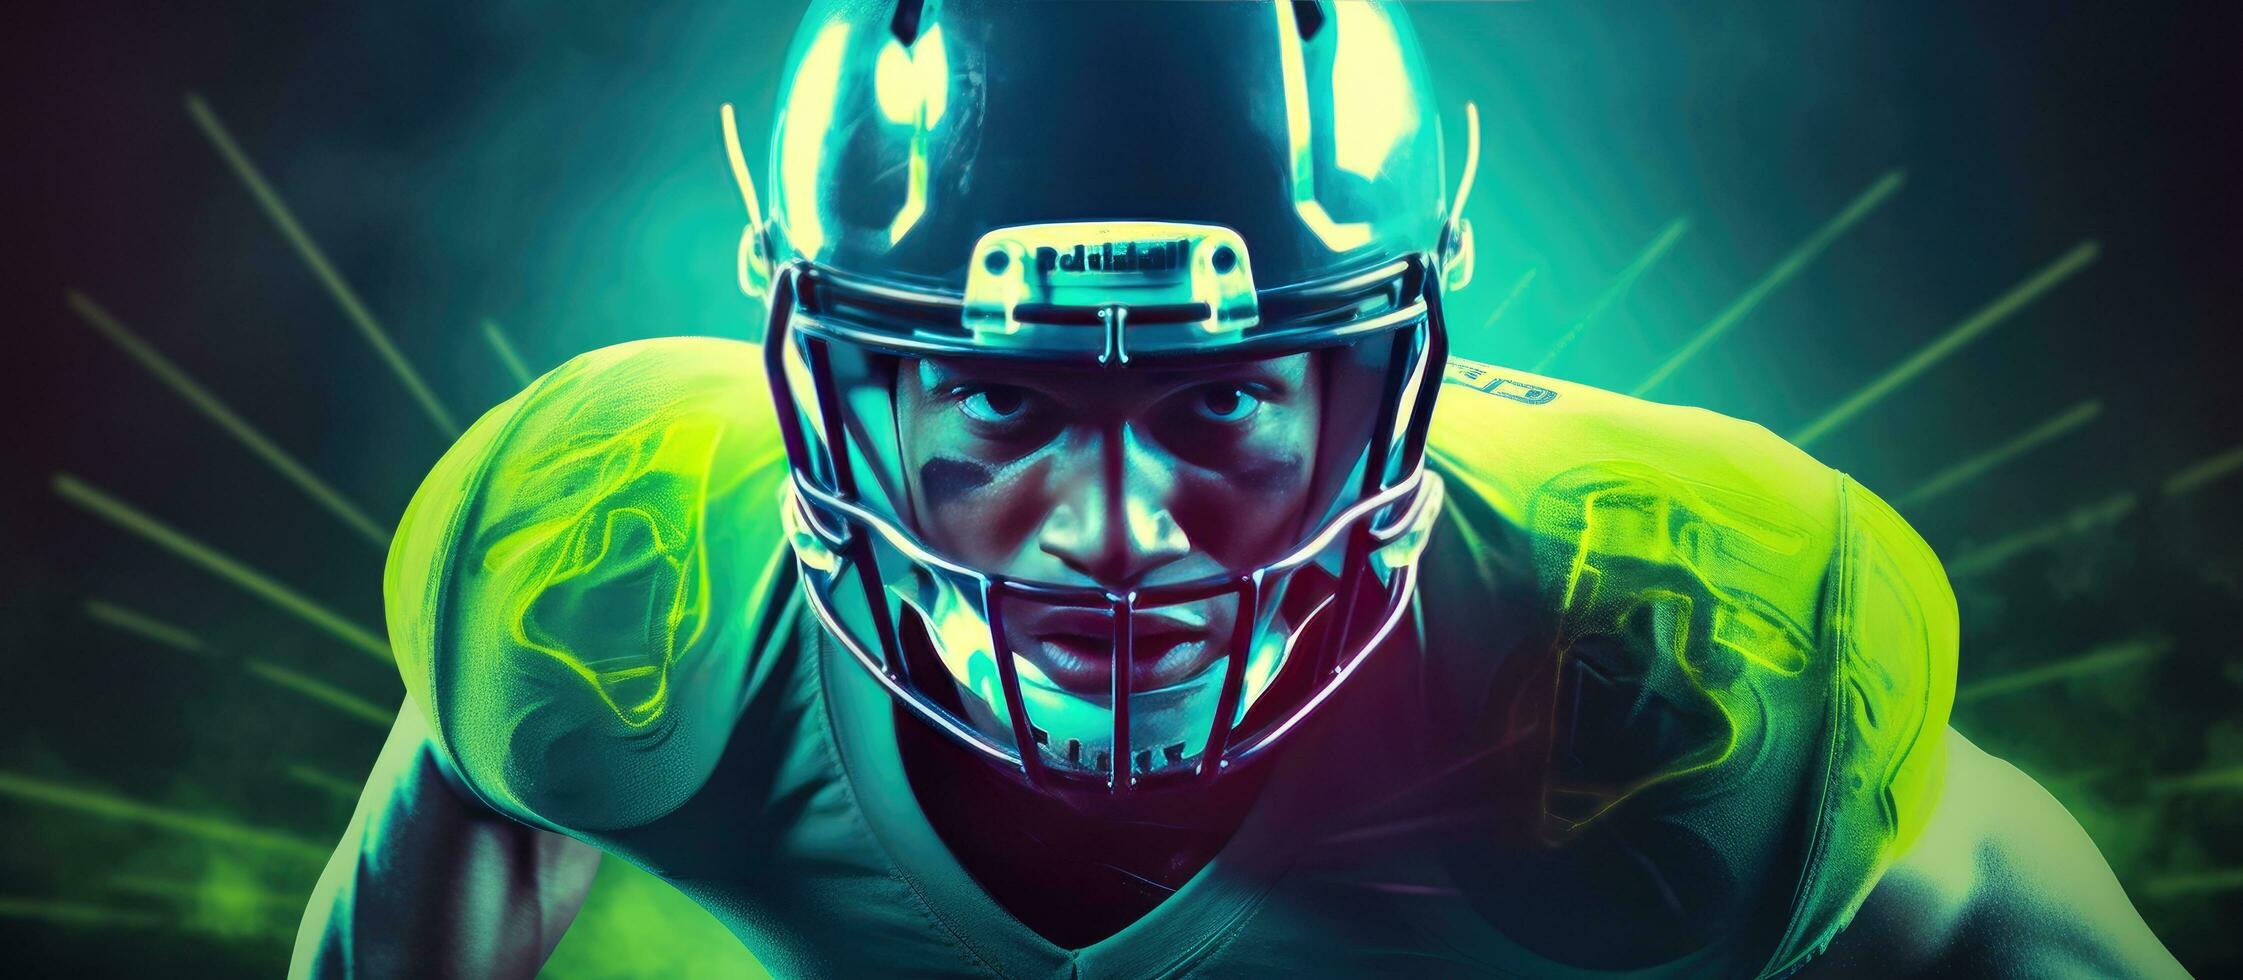 Neon colored banner with copy space for bookmaker ads featuring an American football player Ideal for betting advertisements Includes sports betting footb photo